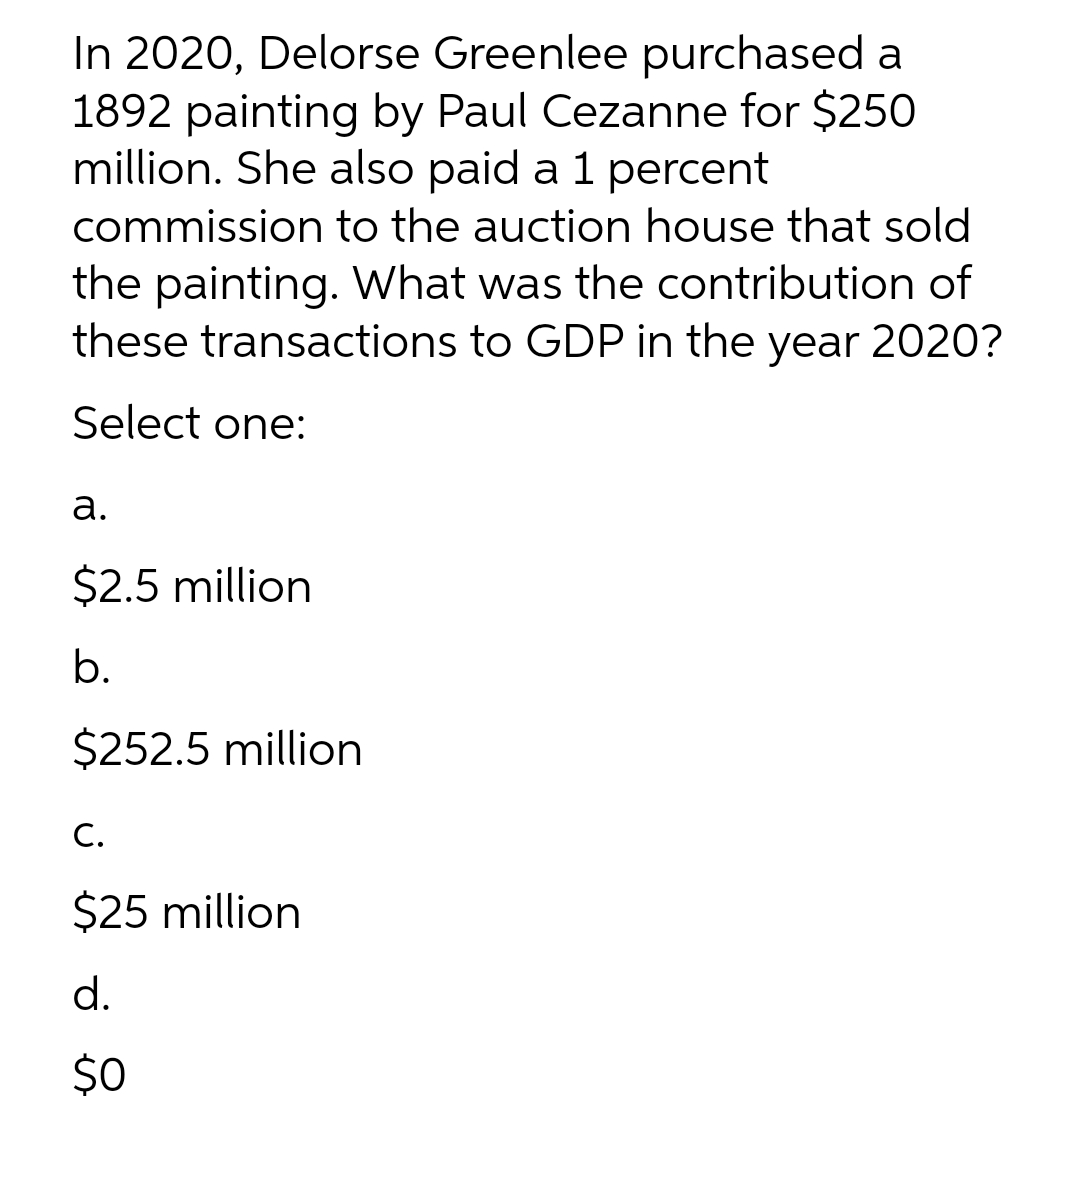 In 2020, Delorse Greenlee purchased a
1892 painting by Paul Cezanne for $250
million. She also paid a 1 percent
commission to the auction house that sold
the painting. What was the contribution of
these transactions to GDP in the year 2020?
Select one:
a.
$2.5 million
b.
$252.5 million
C.
$25 million
d.
$0